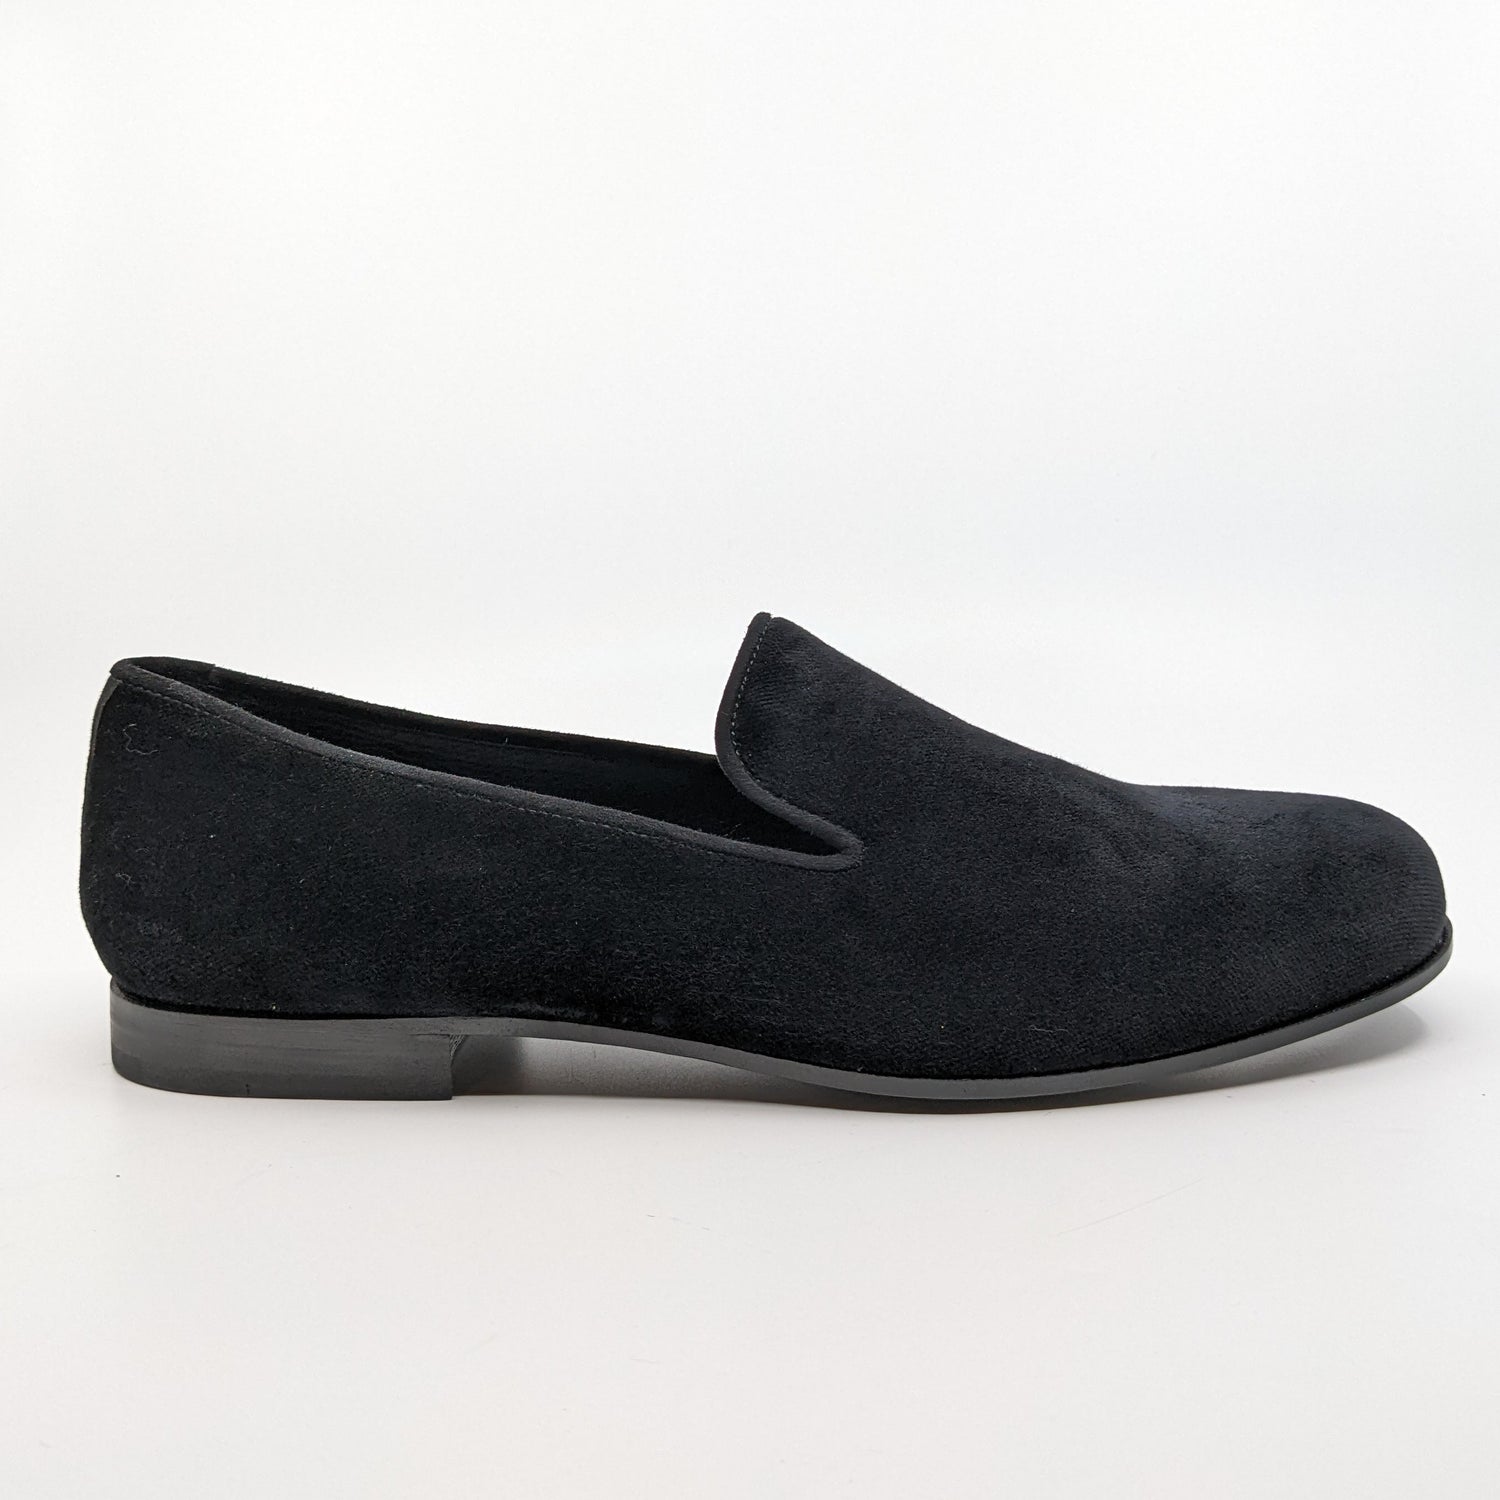 Black slipper in gray sole in the shoes